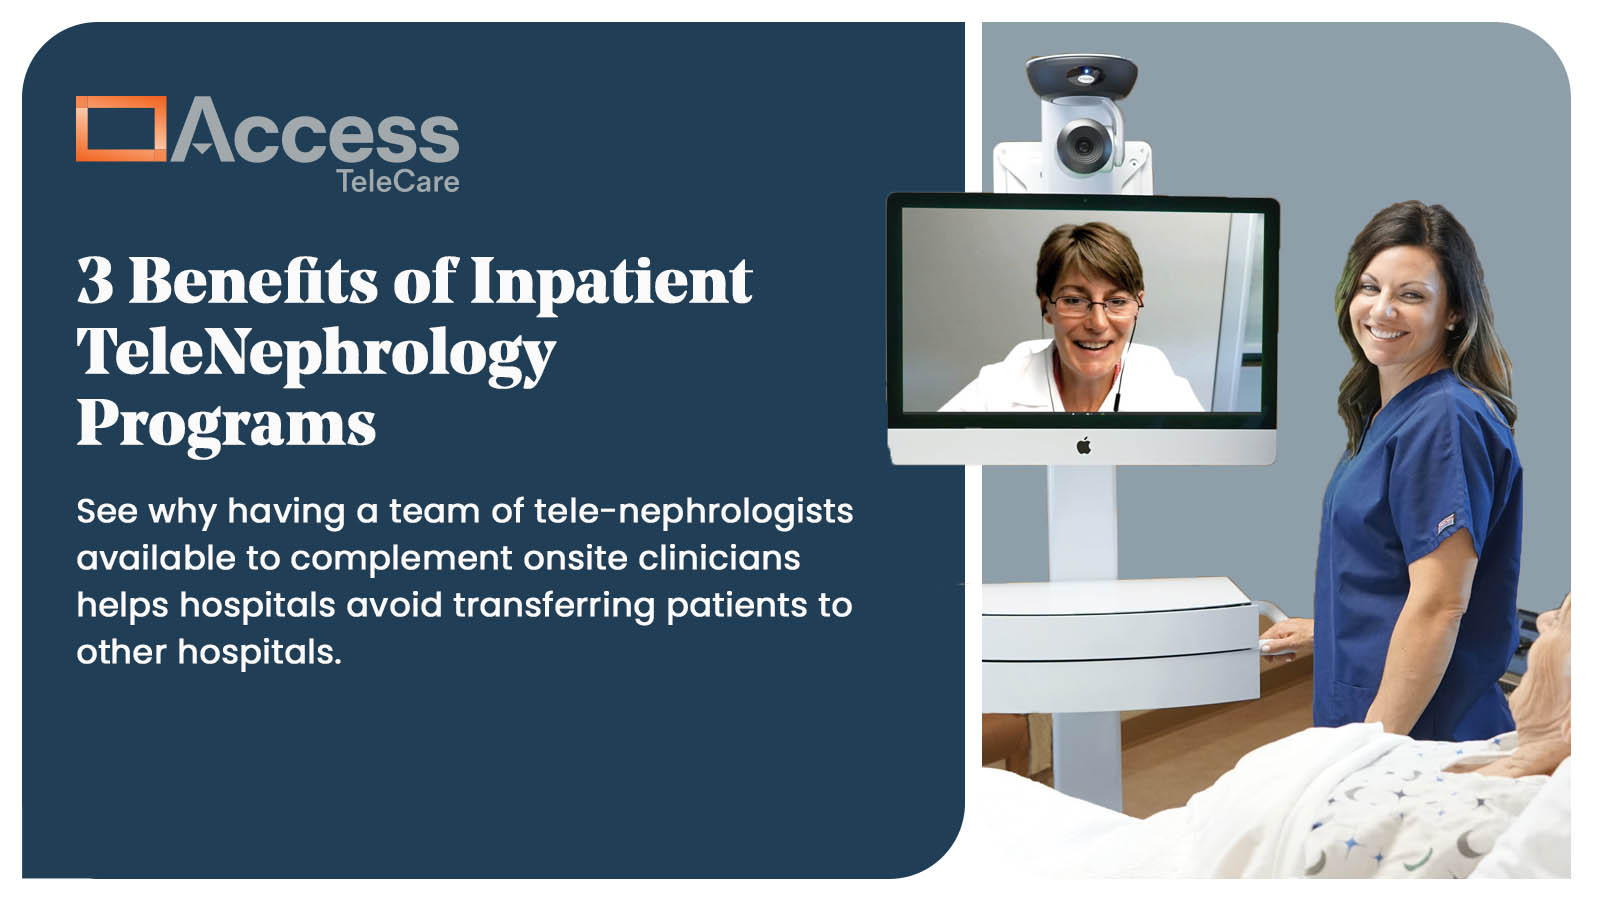 Telemedicine specialist and health professional discuss inpatient telenephrology with a patient, highlighting its benefits